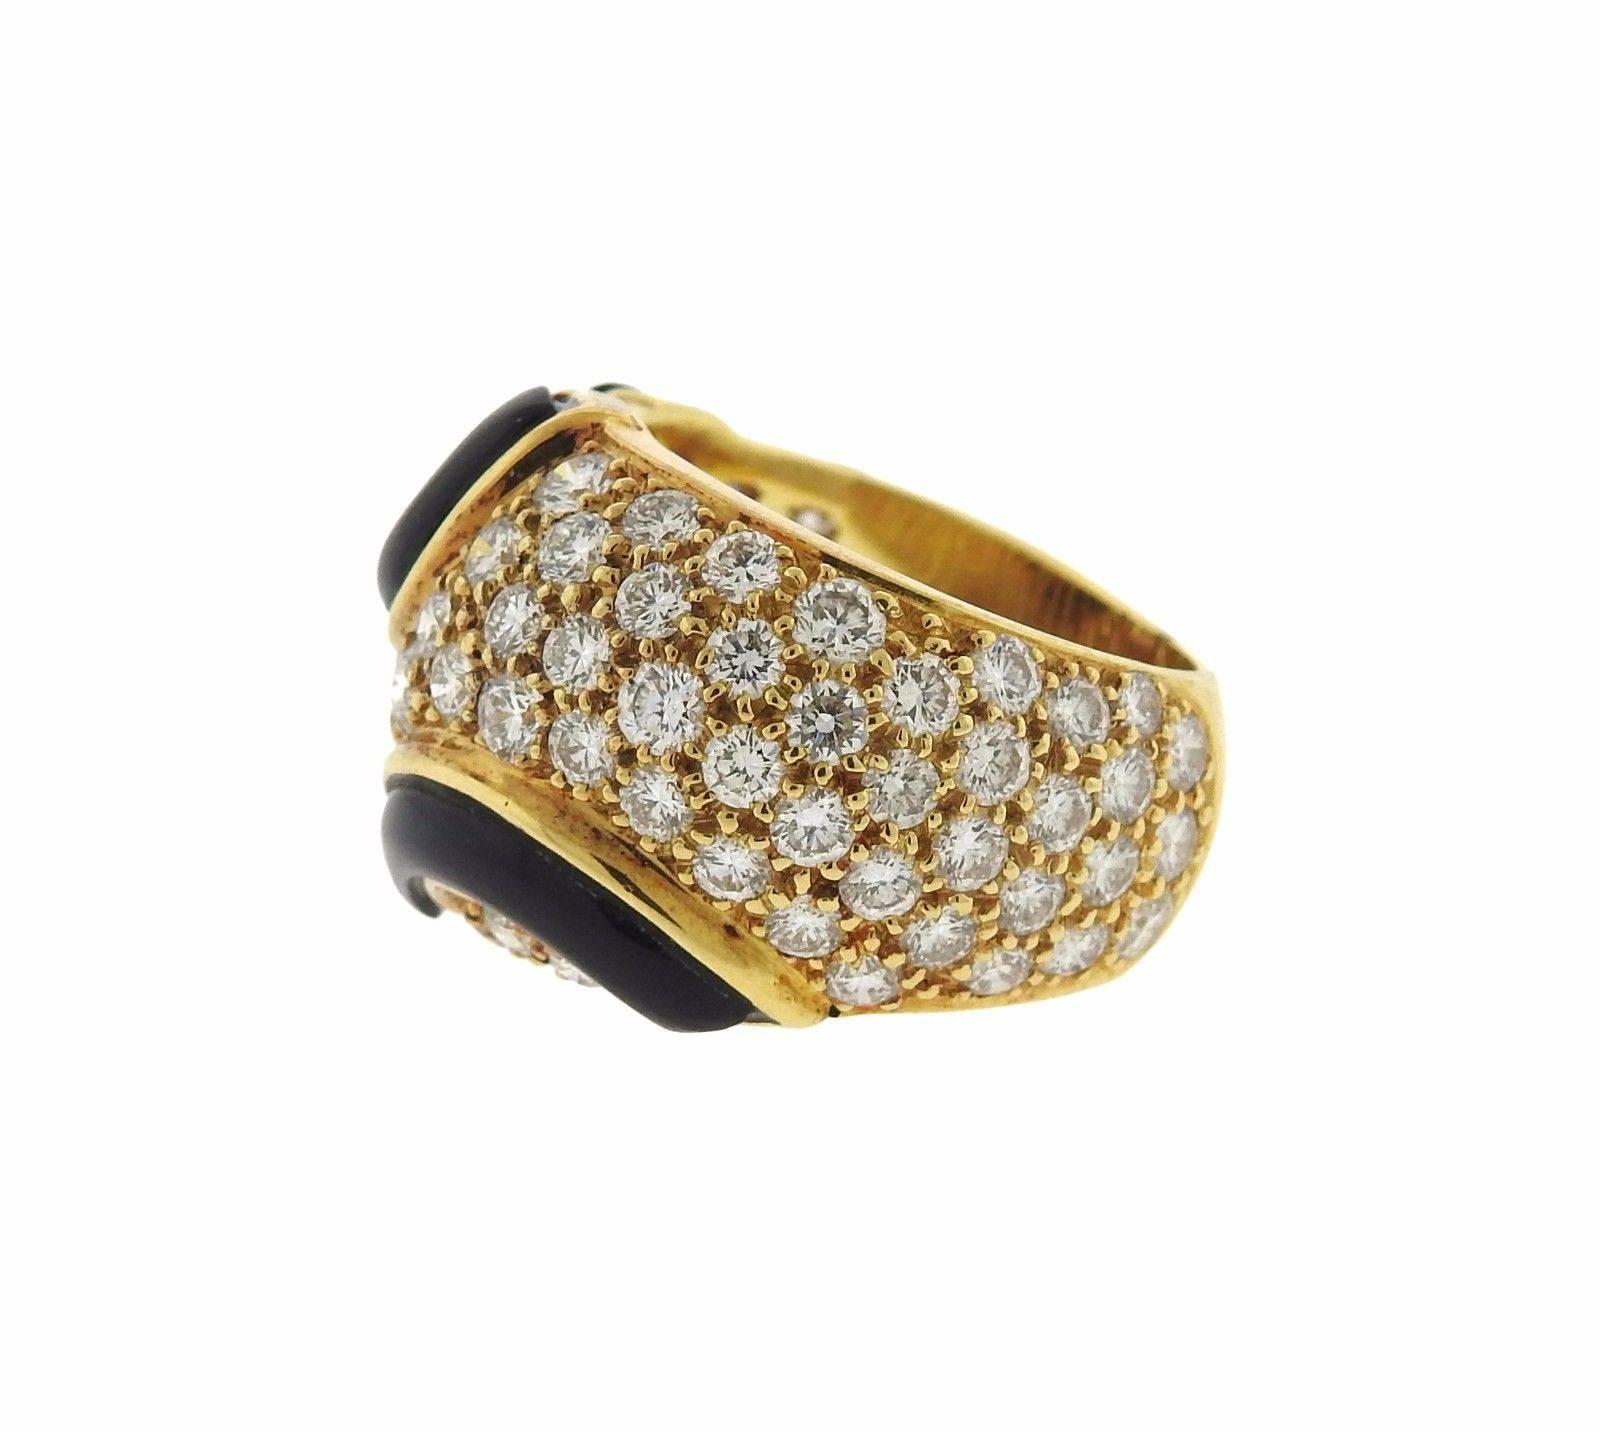 An 18k yellow gold ring set with 1.80ctw of G/VS diamonds and onyx.  The ring is a size 5.75 (can be made larger with sizing balls removed).  The weight of the piece is 10.9 grams.